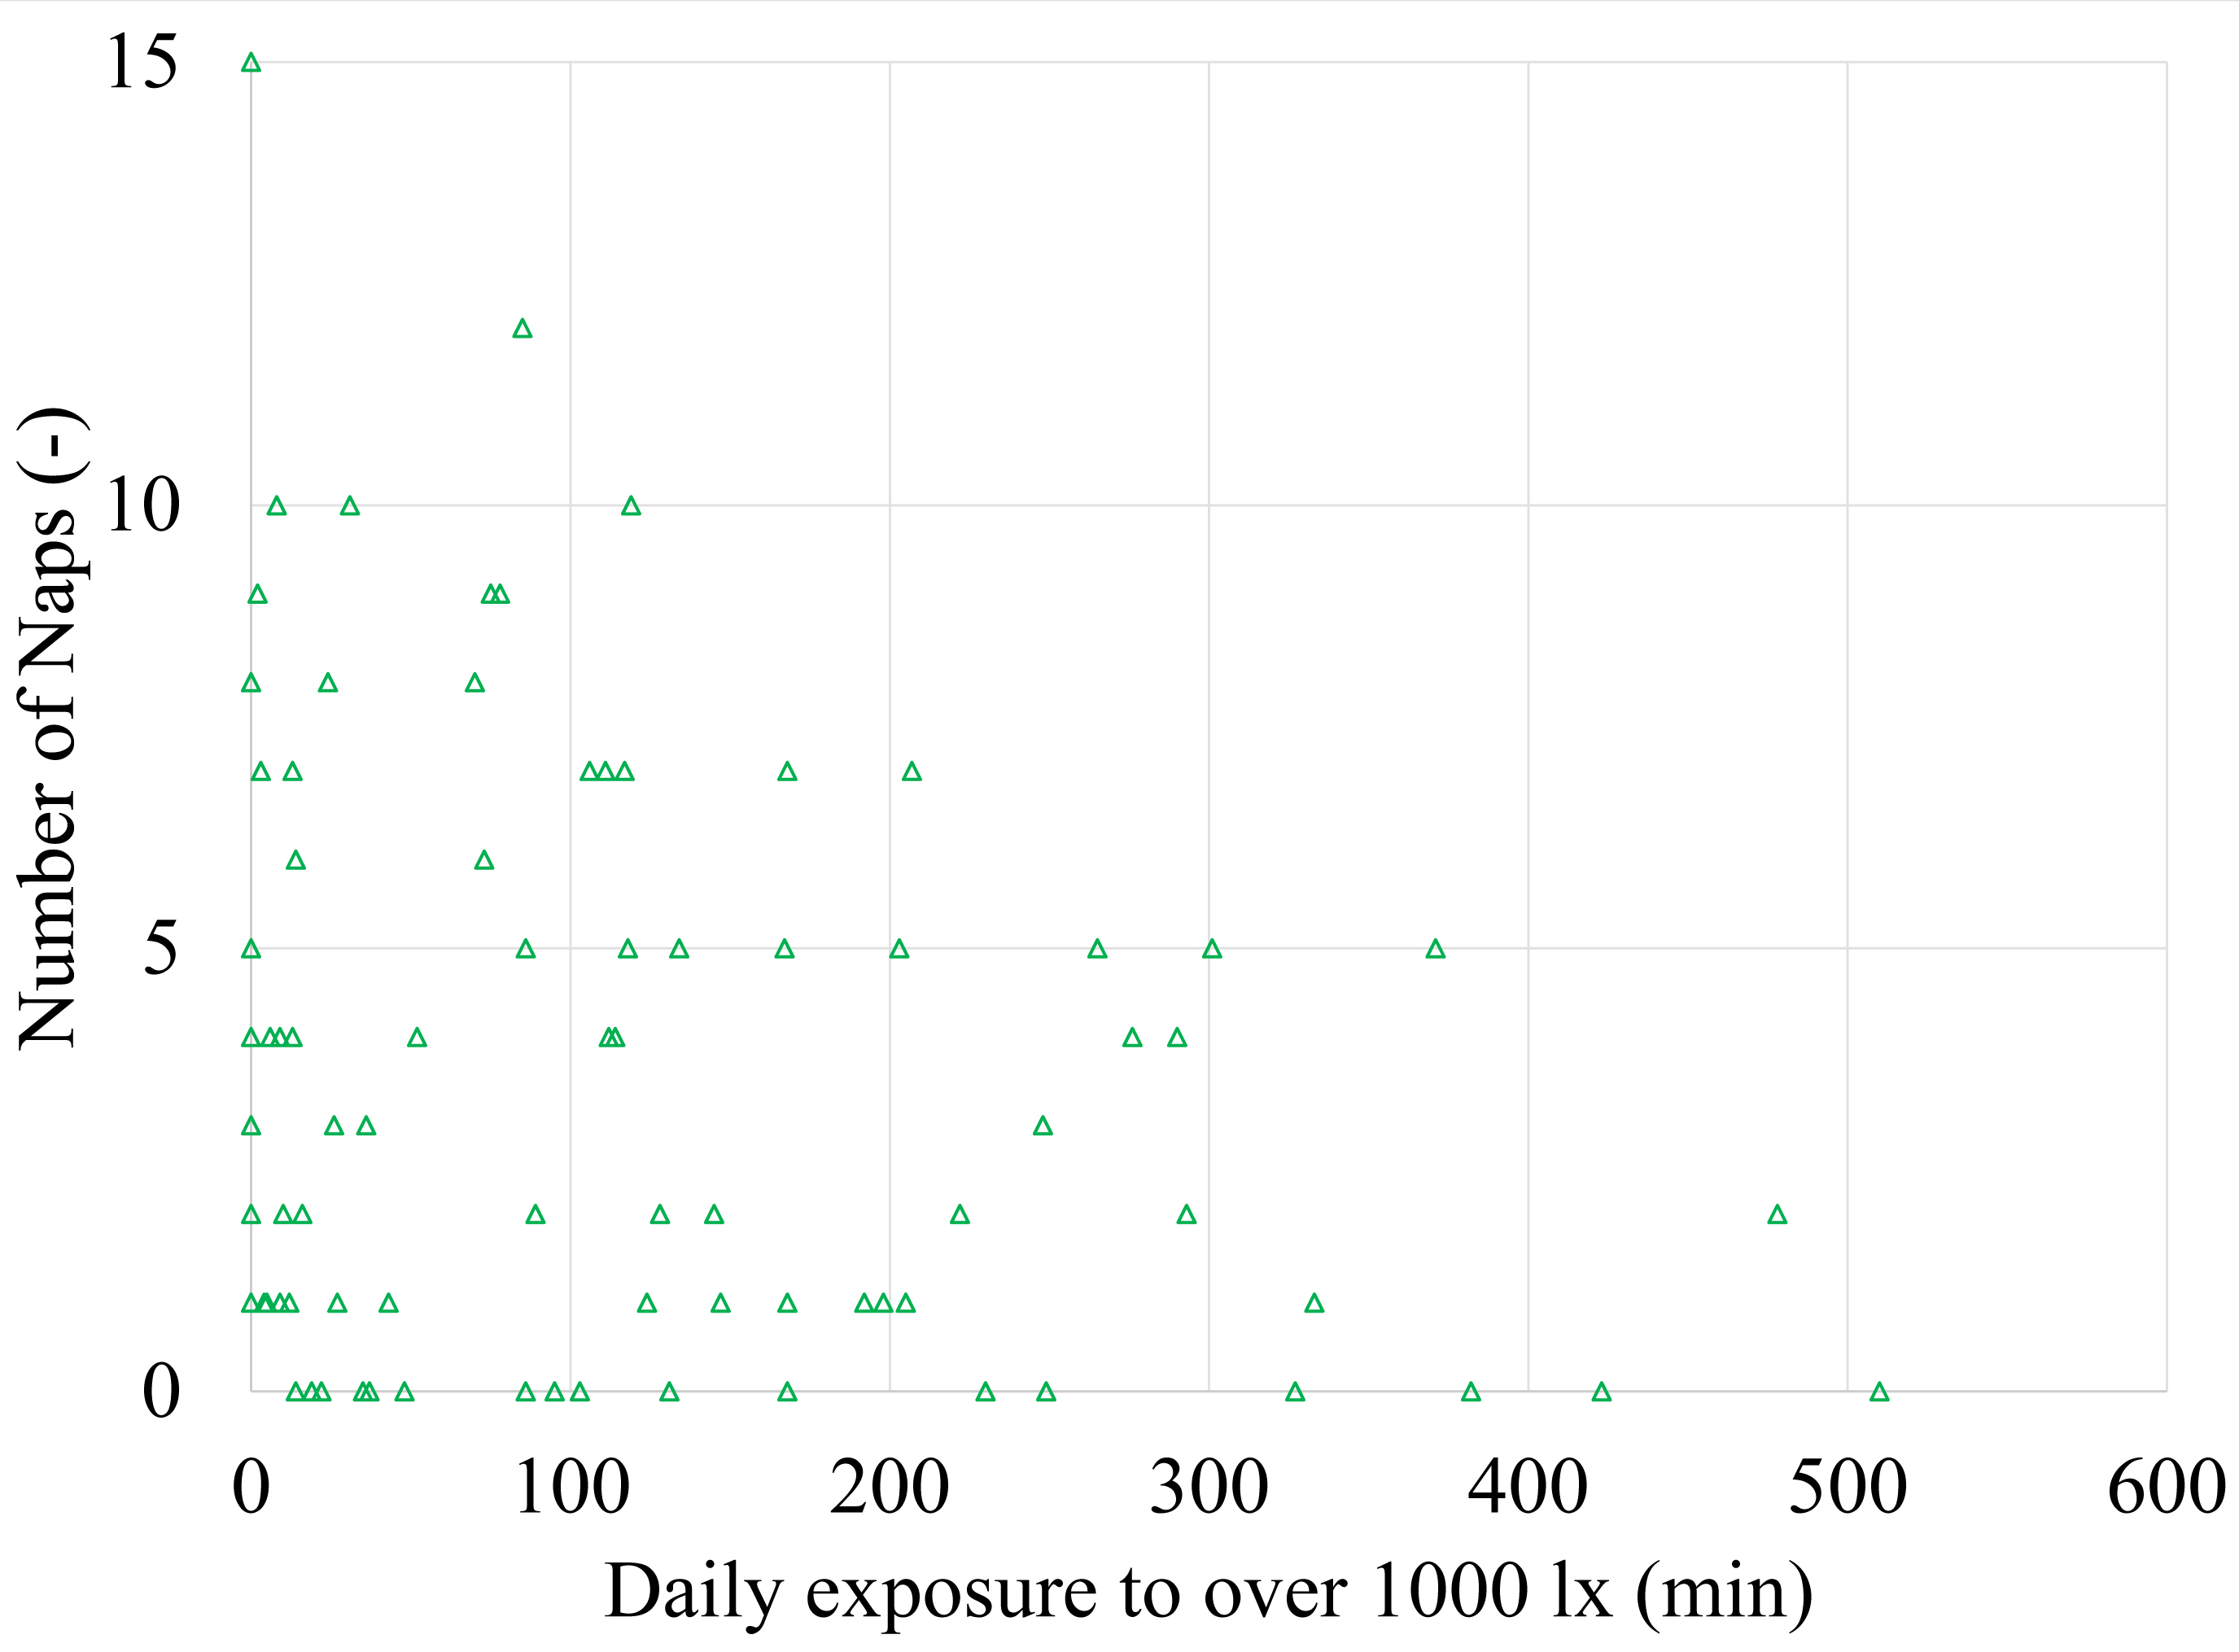 Scatter plot of the number of naps in relation to the daily exposure time to light levels of 1 000 lx and over (n = 107).